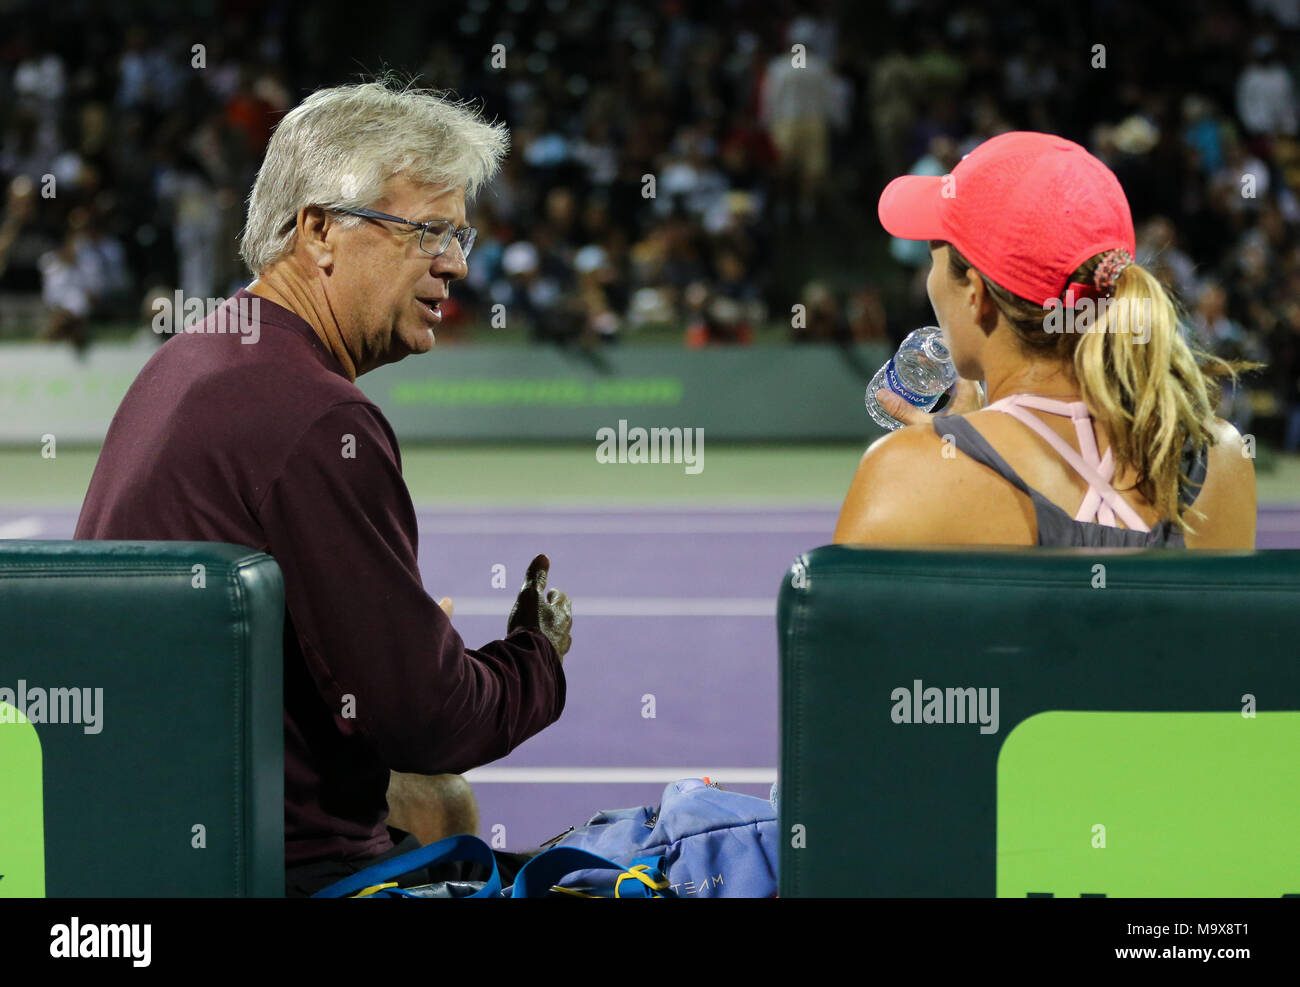 Key Biscayne, Florida, USA. 28th Mar, 2018. Pat Harrison, left, coach of Danielle Collins of the United States, talks to Collins, right, during a change of sides the quarterfinal match against Venus Williams of the United States at the 2018 Miami Open presented by Itau professional tennis tournament, played at the Crandon Park Tennis Center in Key Biscayne, Florida, USA. Collins won 6-2, 6-3. Mario Houben/CSM/Alamy Live News Stock Photo